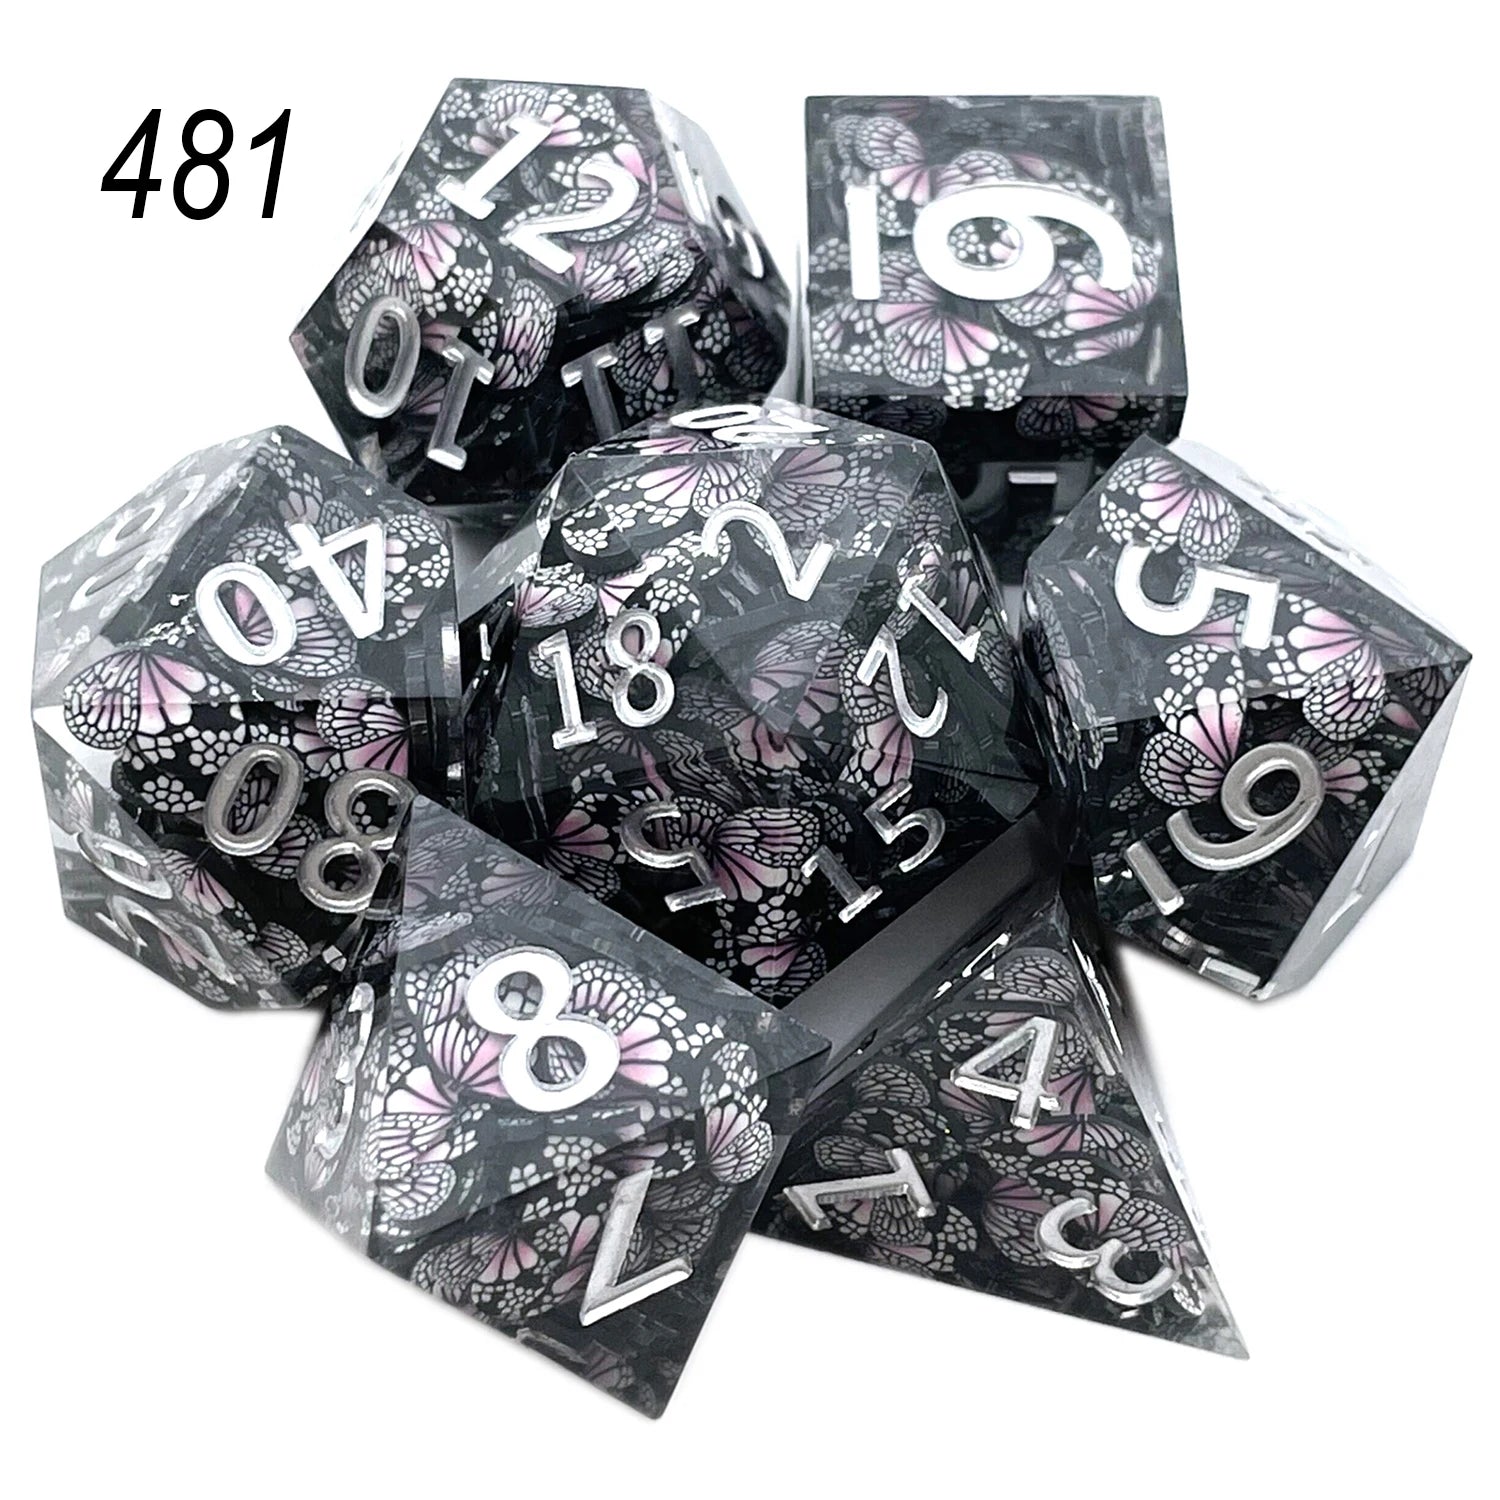 Solid Polyhedral Dice for Role Playing, Resin Dice, Dragon Scale, D, Rpg, Rol, Pathfinder, Board Game, Gifts, 7PCs, 2023 481